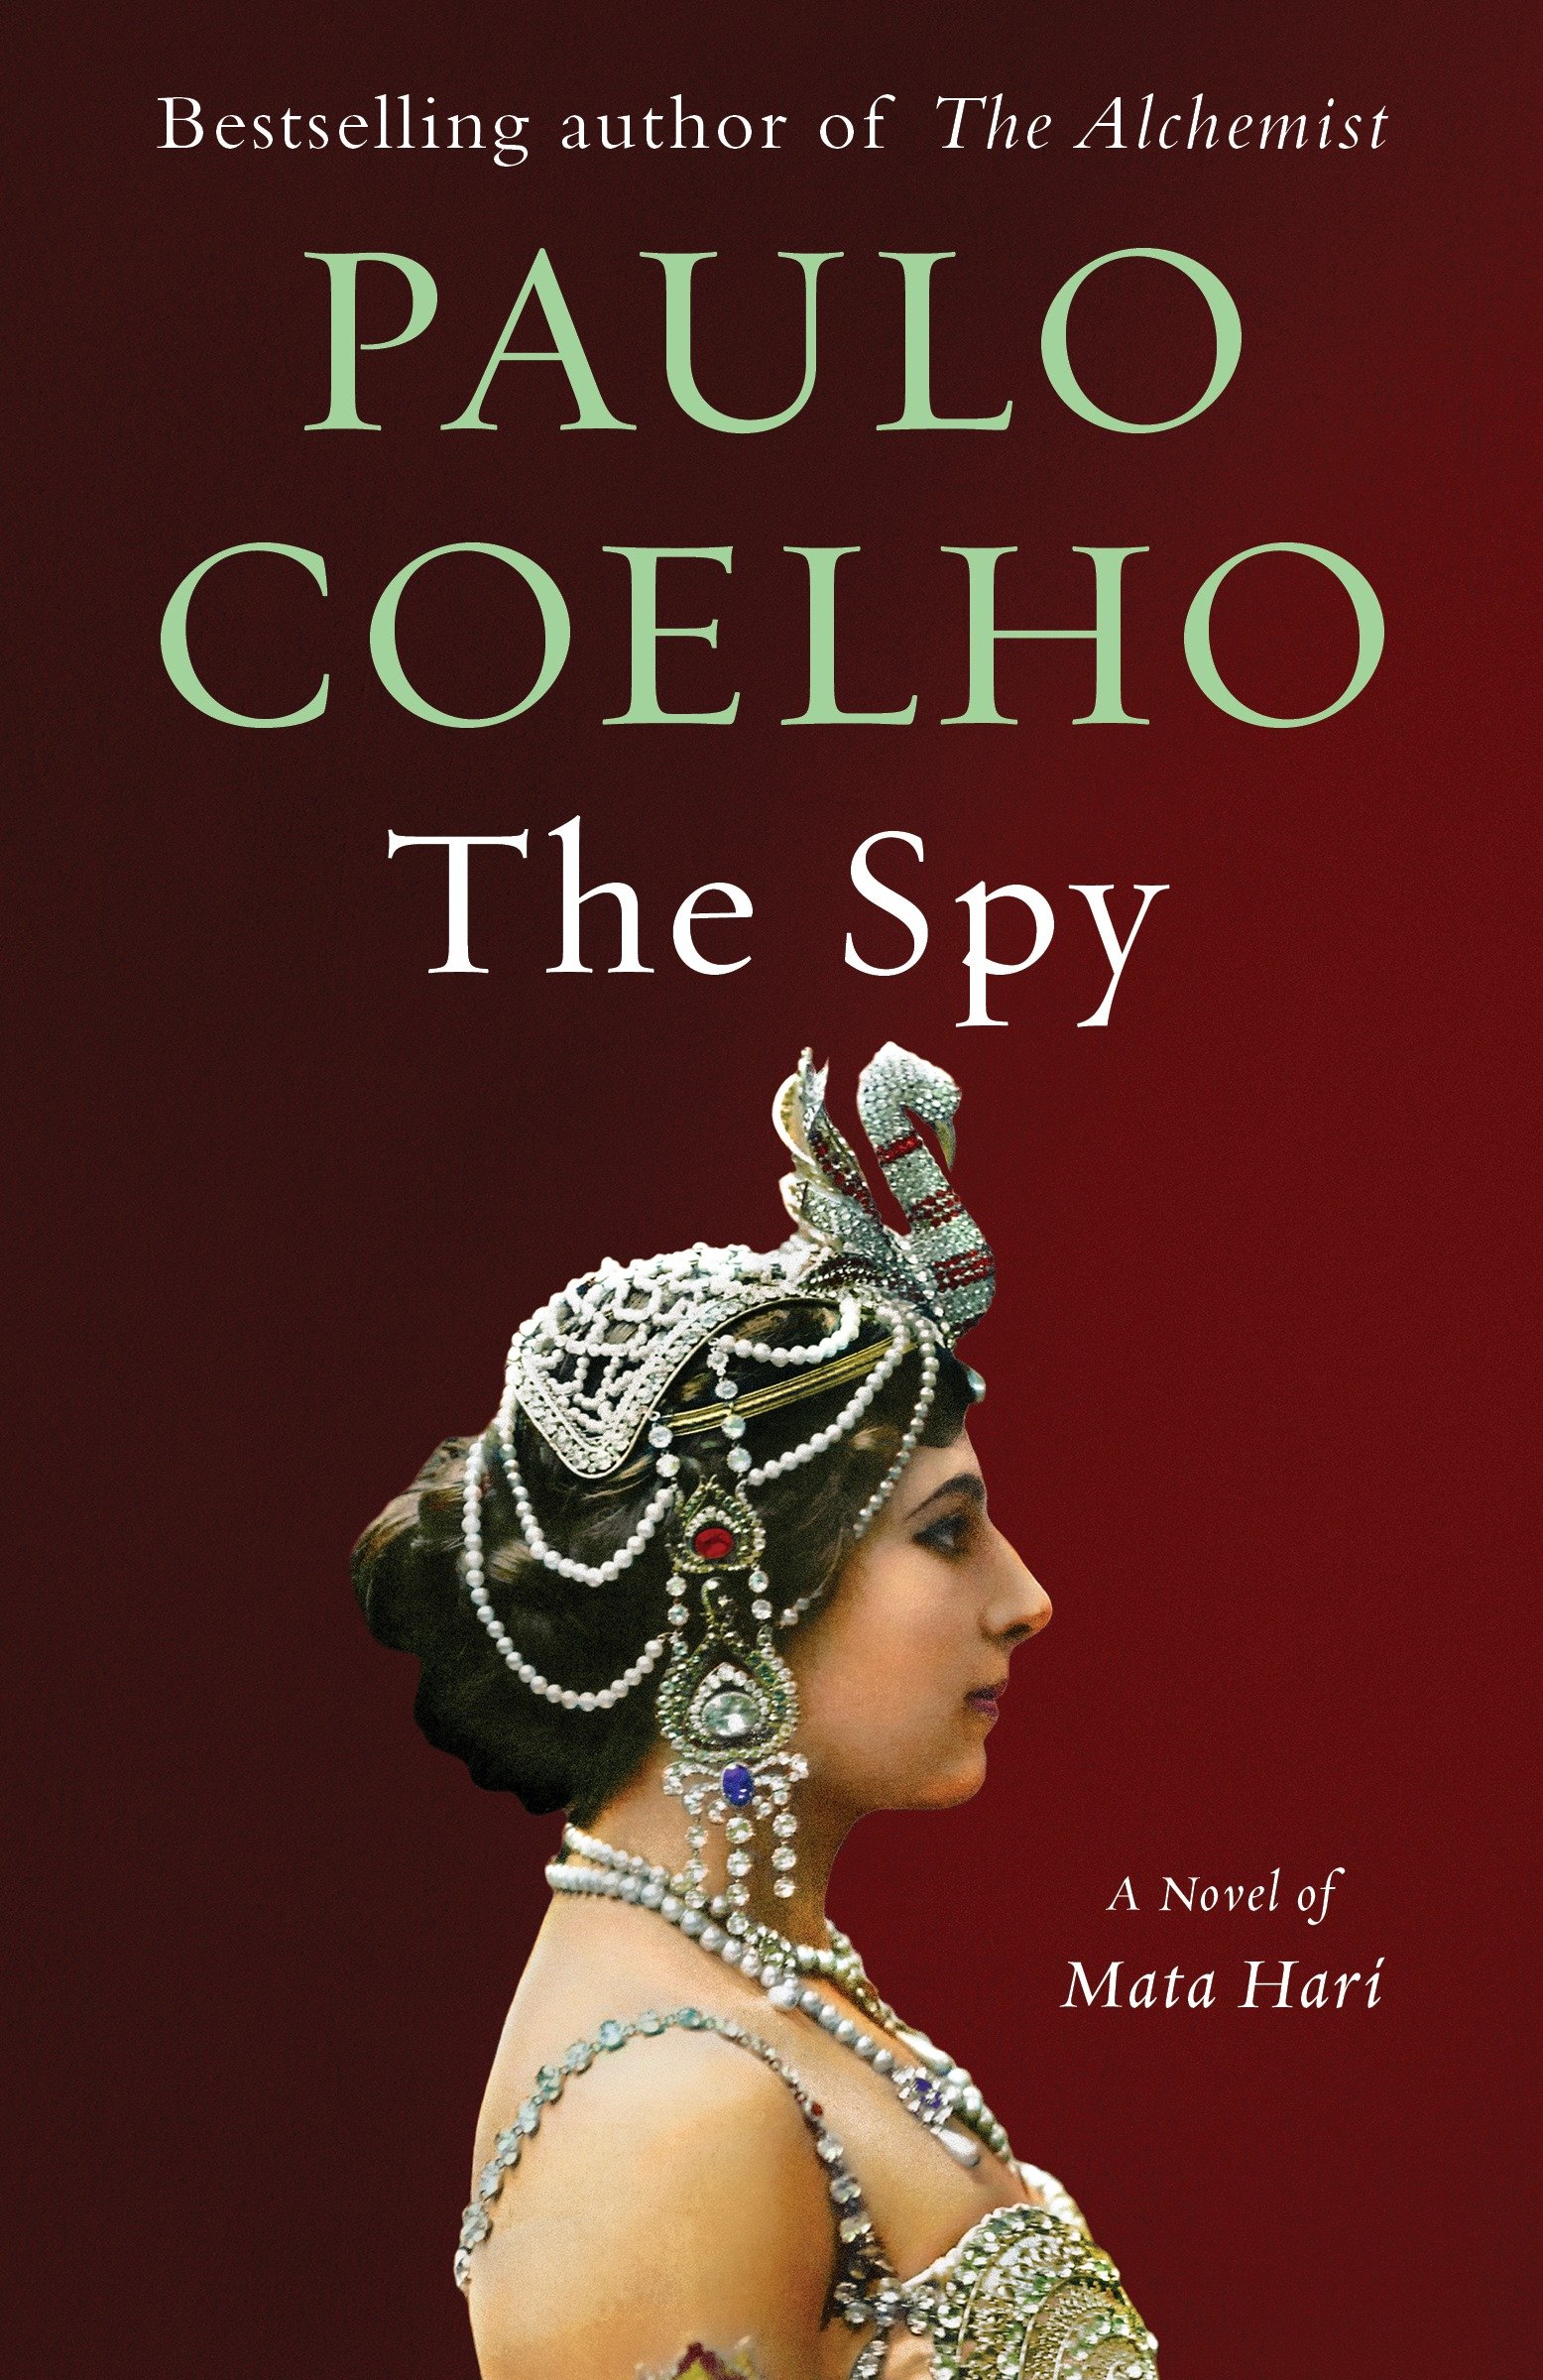 The spy cover image